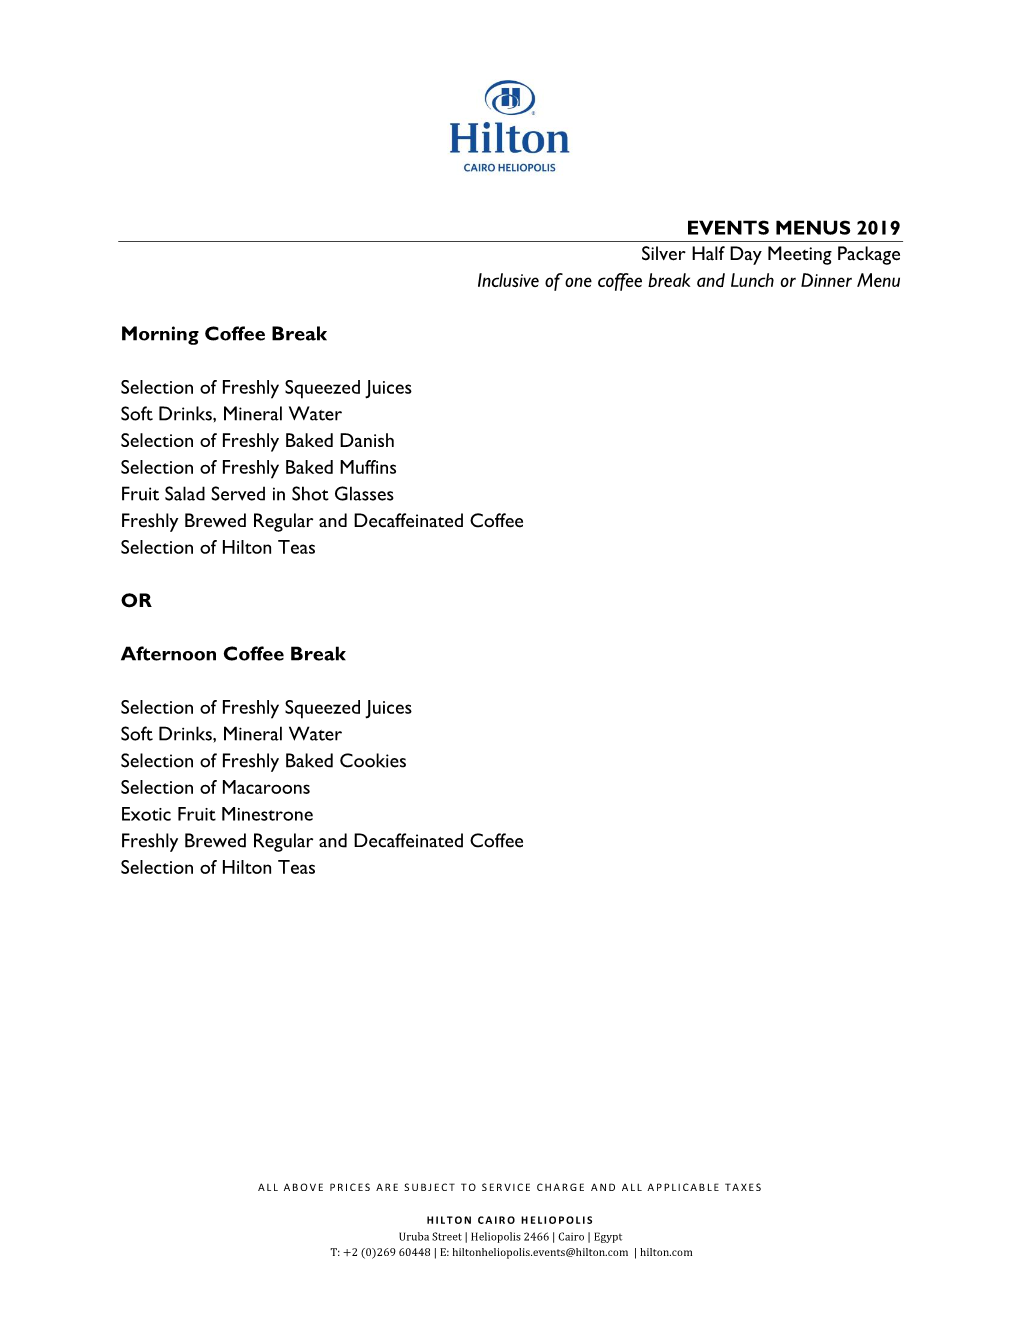 EVENTS MENUS 2019 Silver Half Day Meeting Package Inclusive of One Coffee Break and Lunch Or Dinner Menu